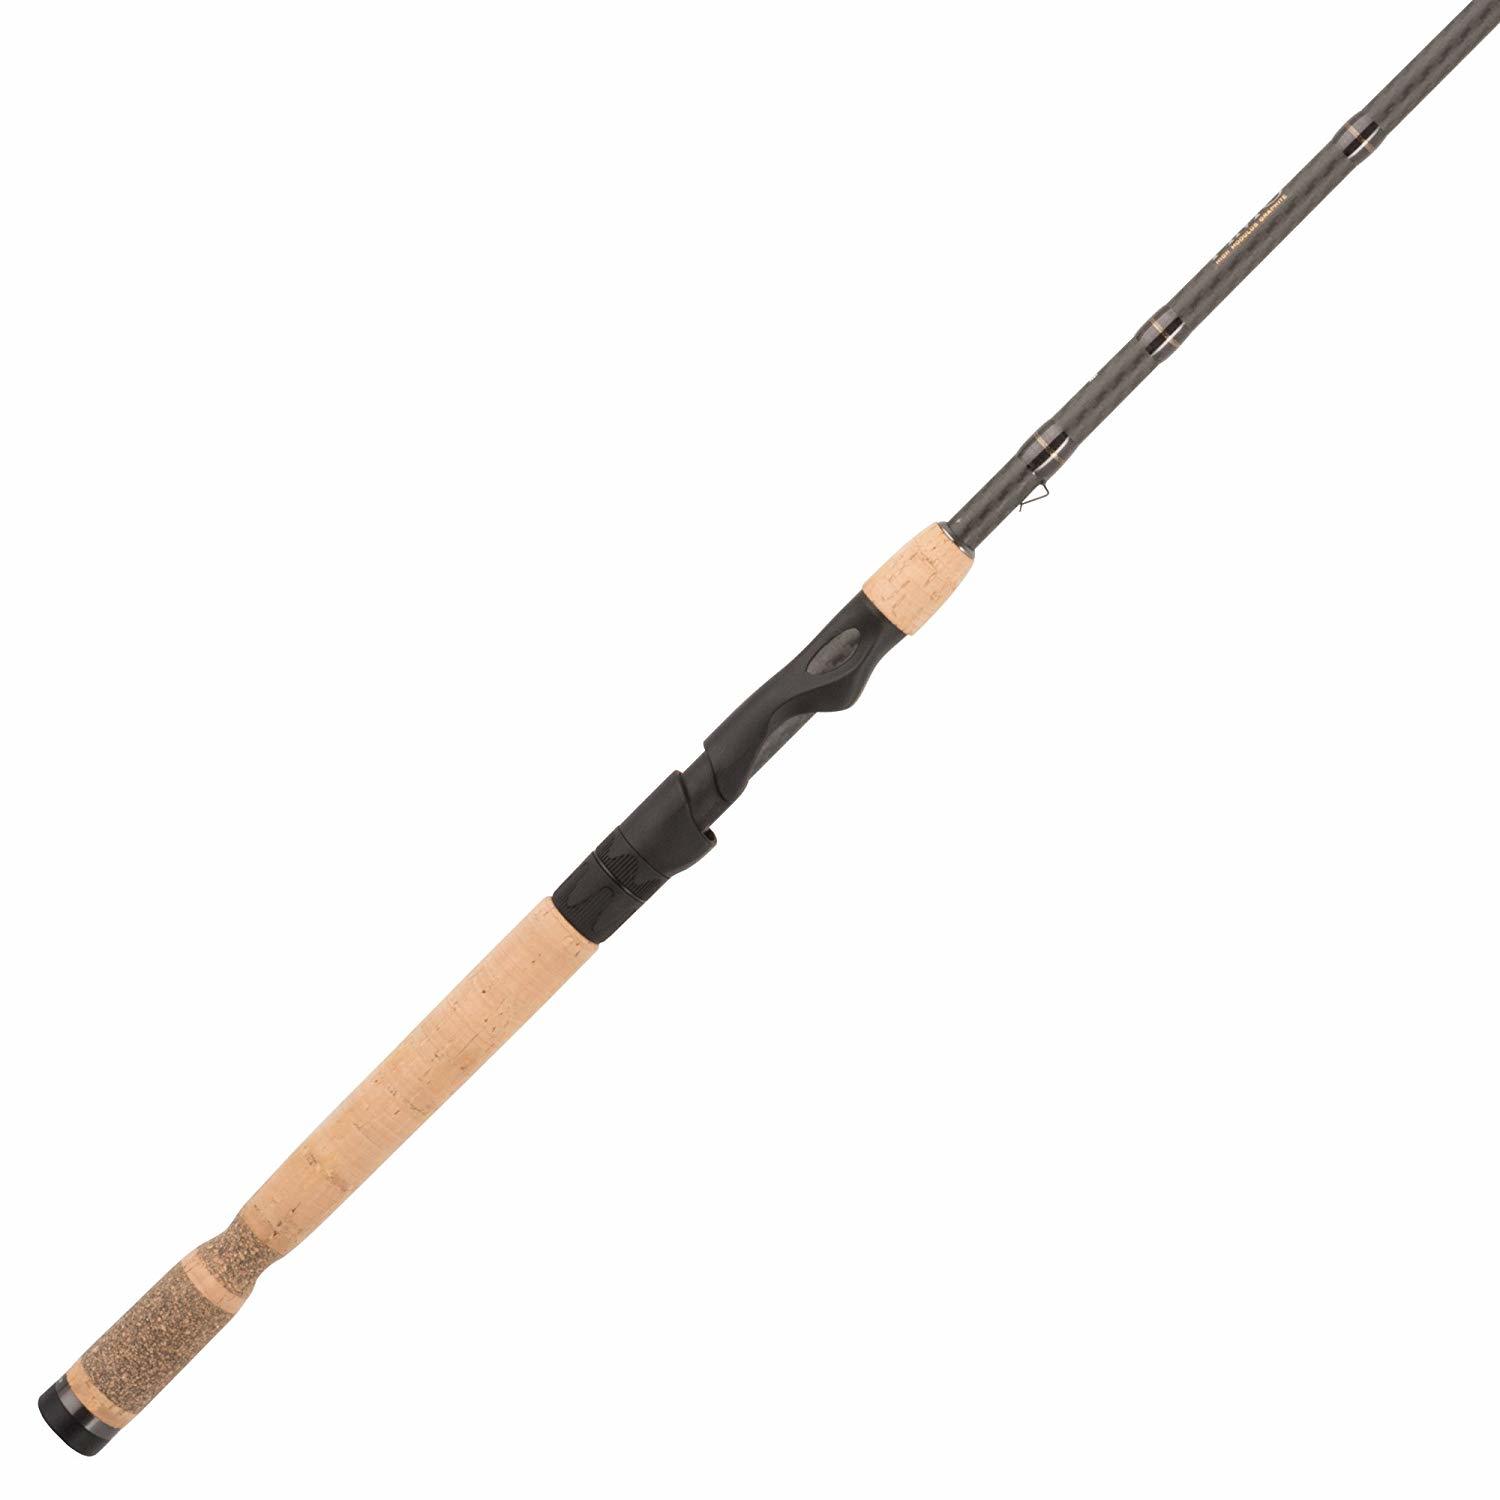 Fenwick Rods: The Top Models to Check Out 2022 | Fishing Rex